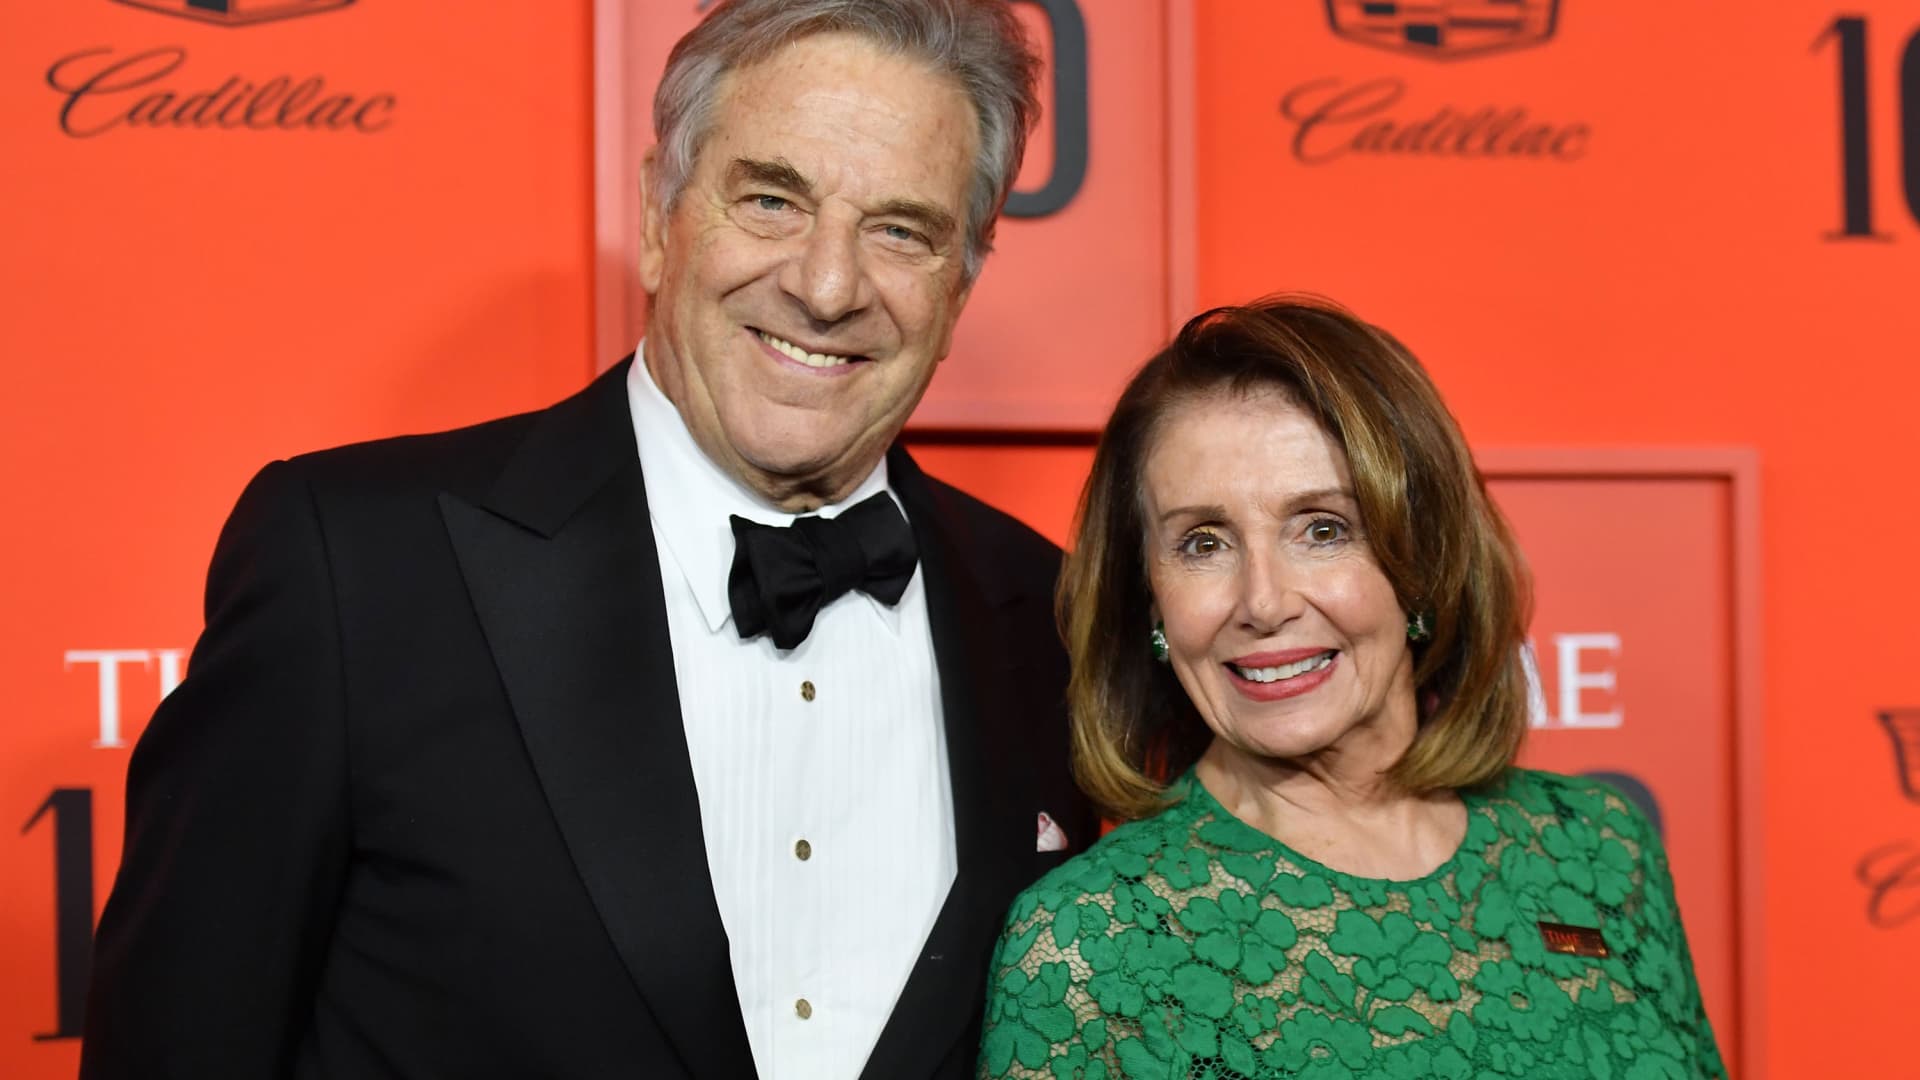 Members of Congress express support for Paul Pelosi following violent attack